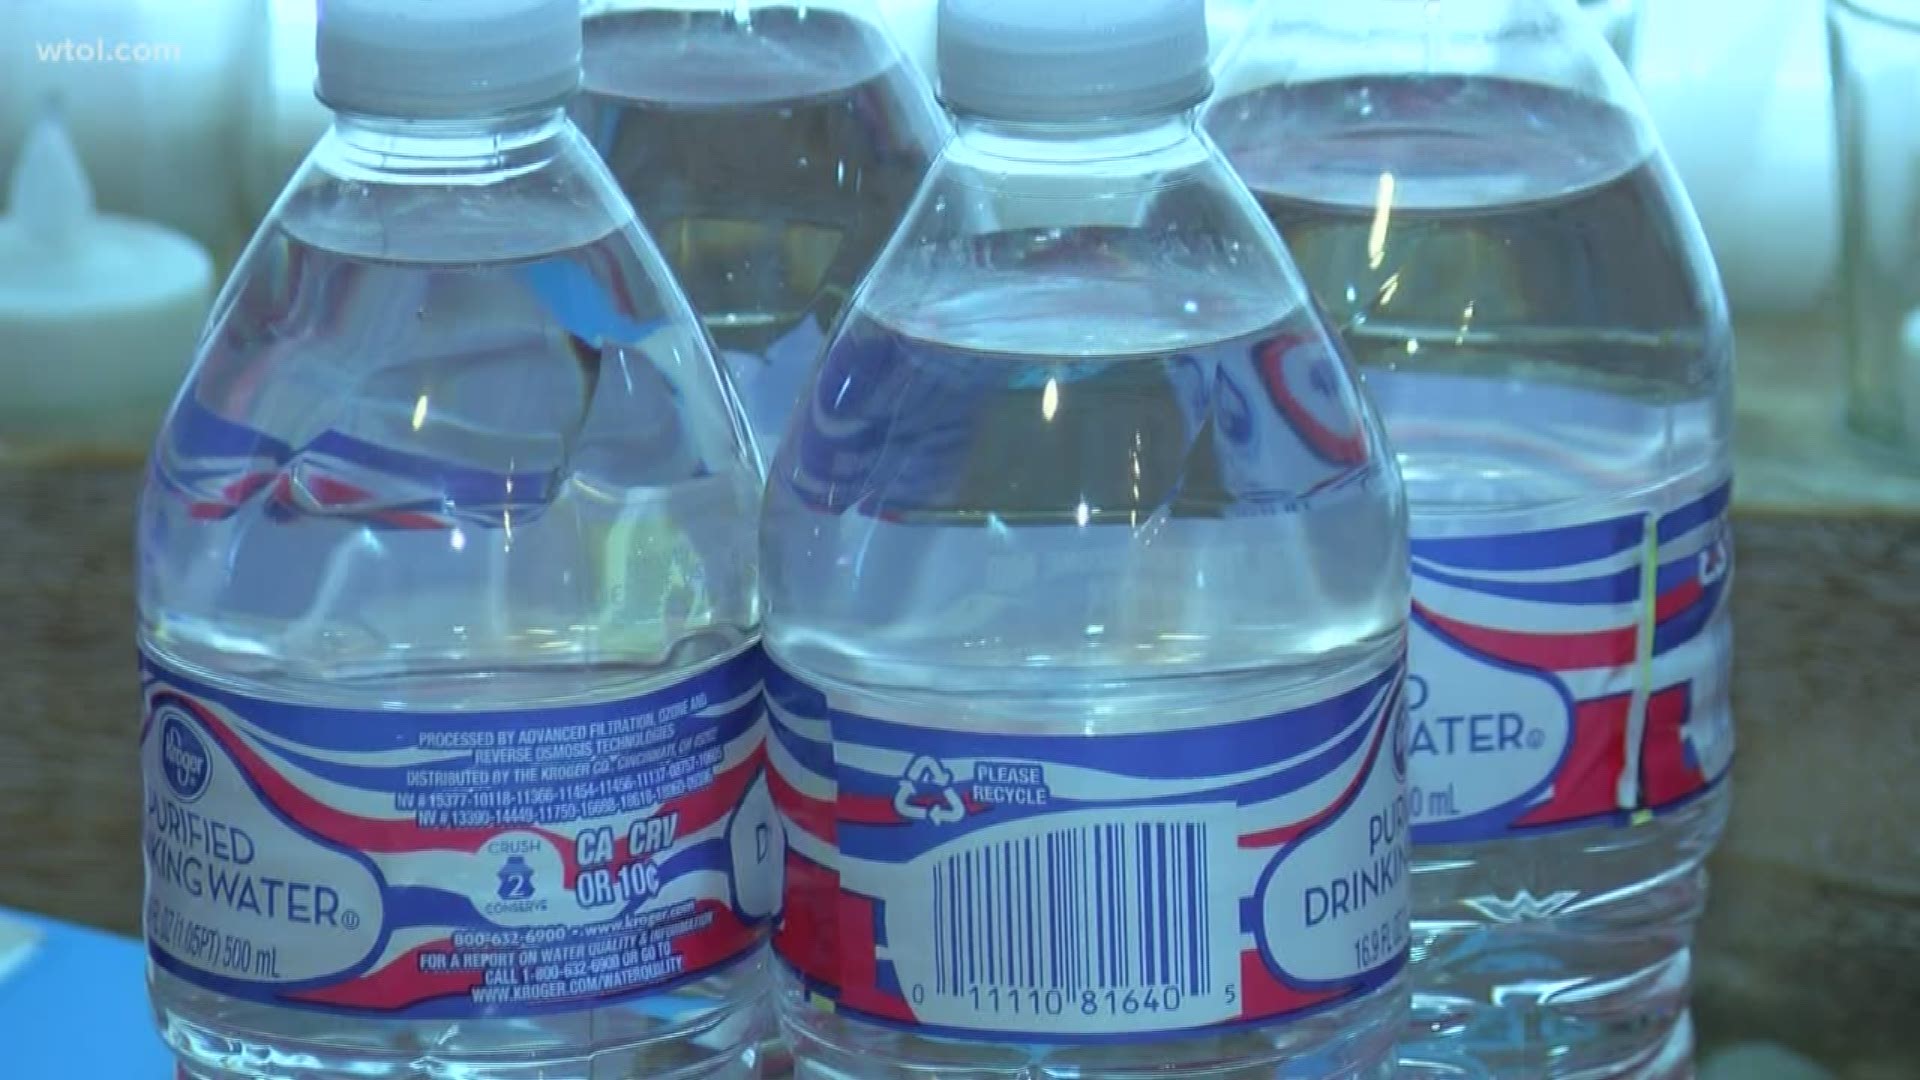 A judge in Maumee requested that Arrowhead Lake Mobile Home Park provides one gallon of drinking water per day, per person in an escrowed home.